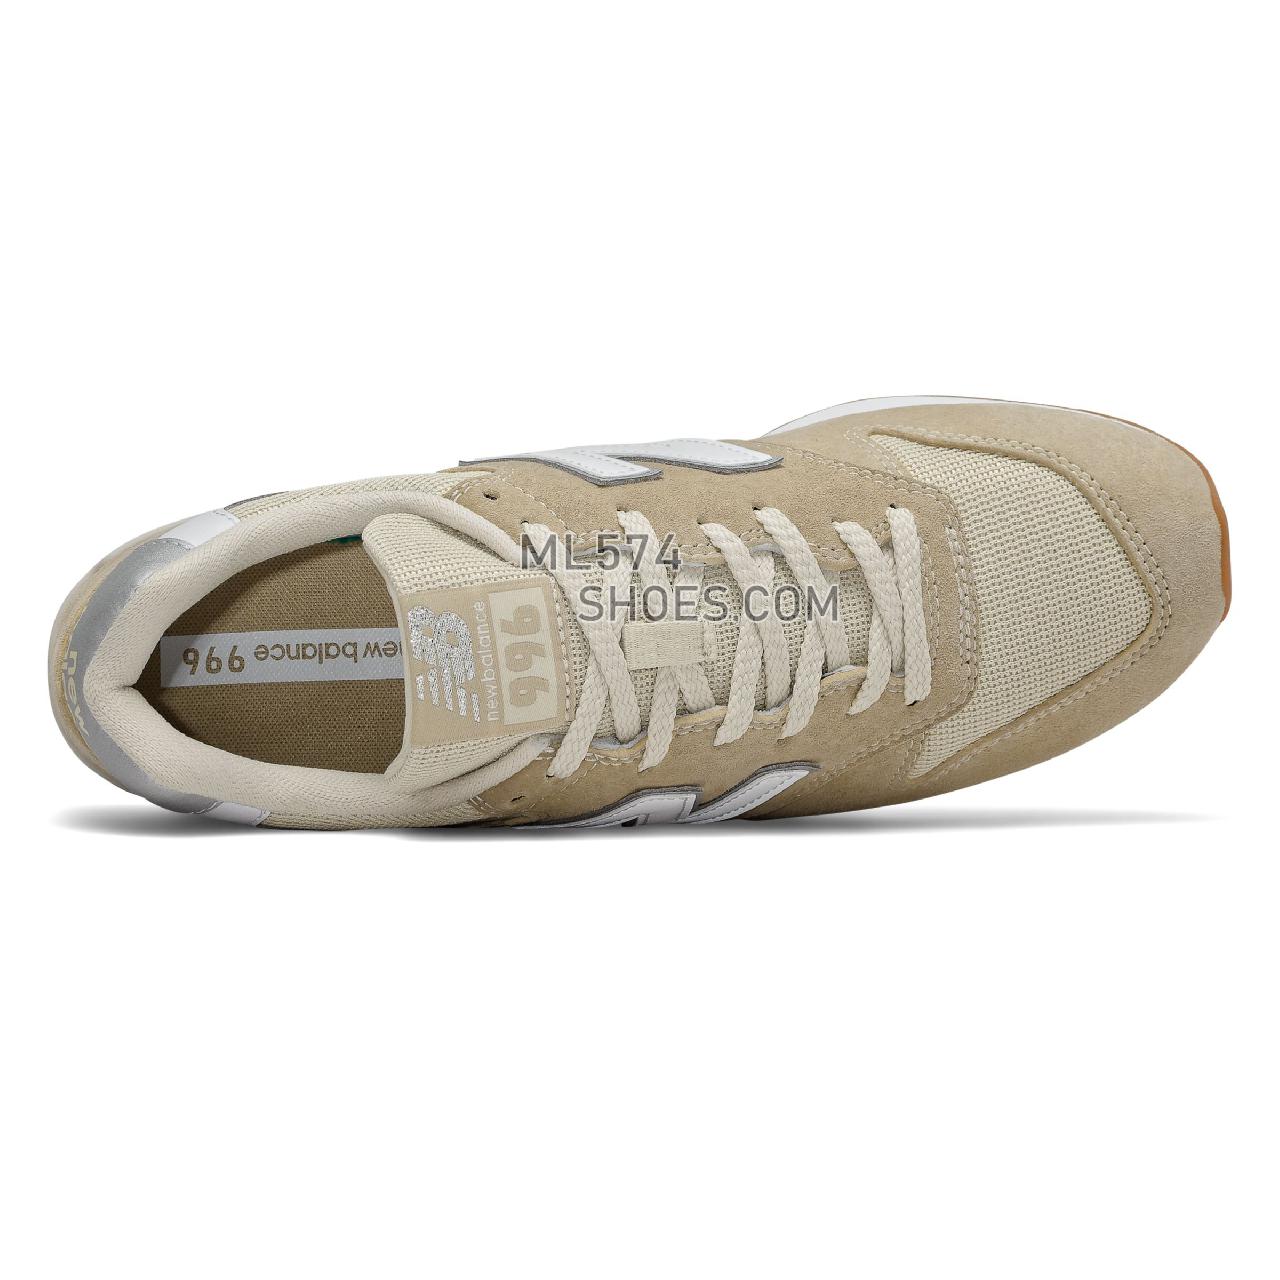 New Balance 996 - Men's 996 Classic - Incense with Munsell White - CM996SMT